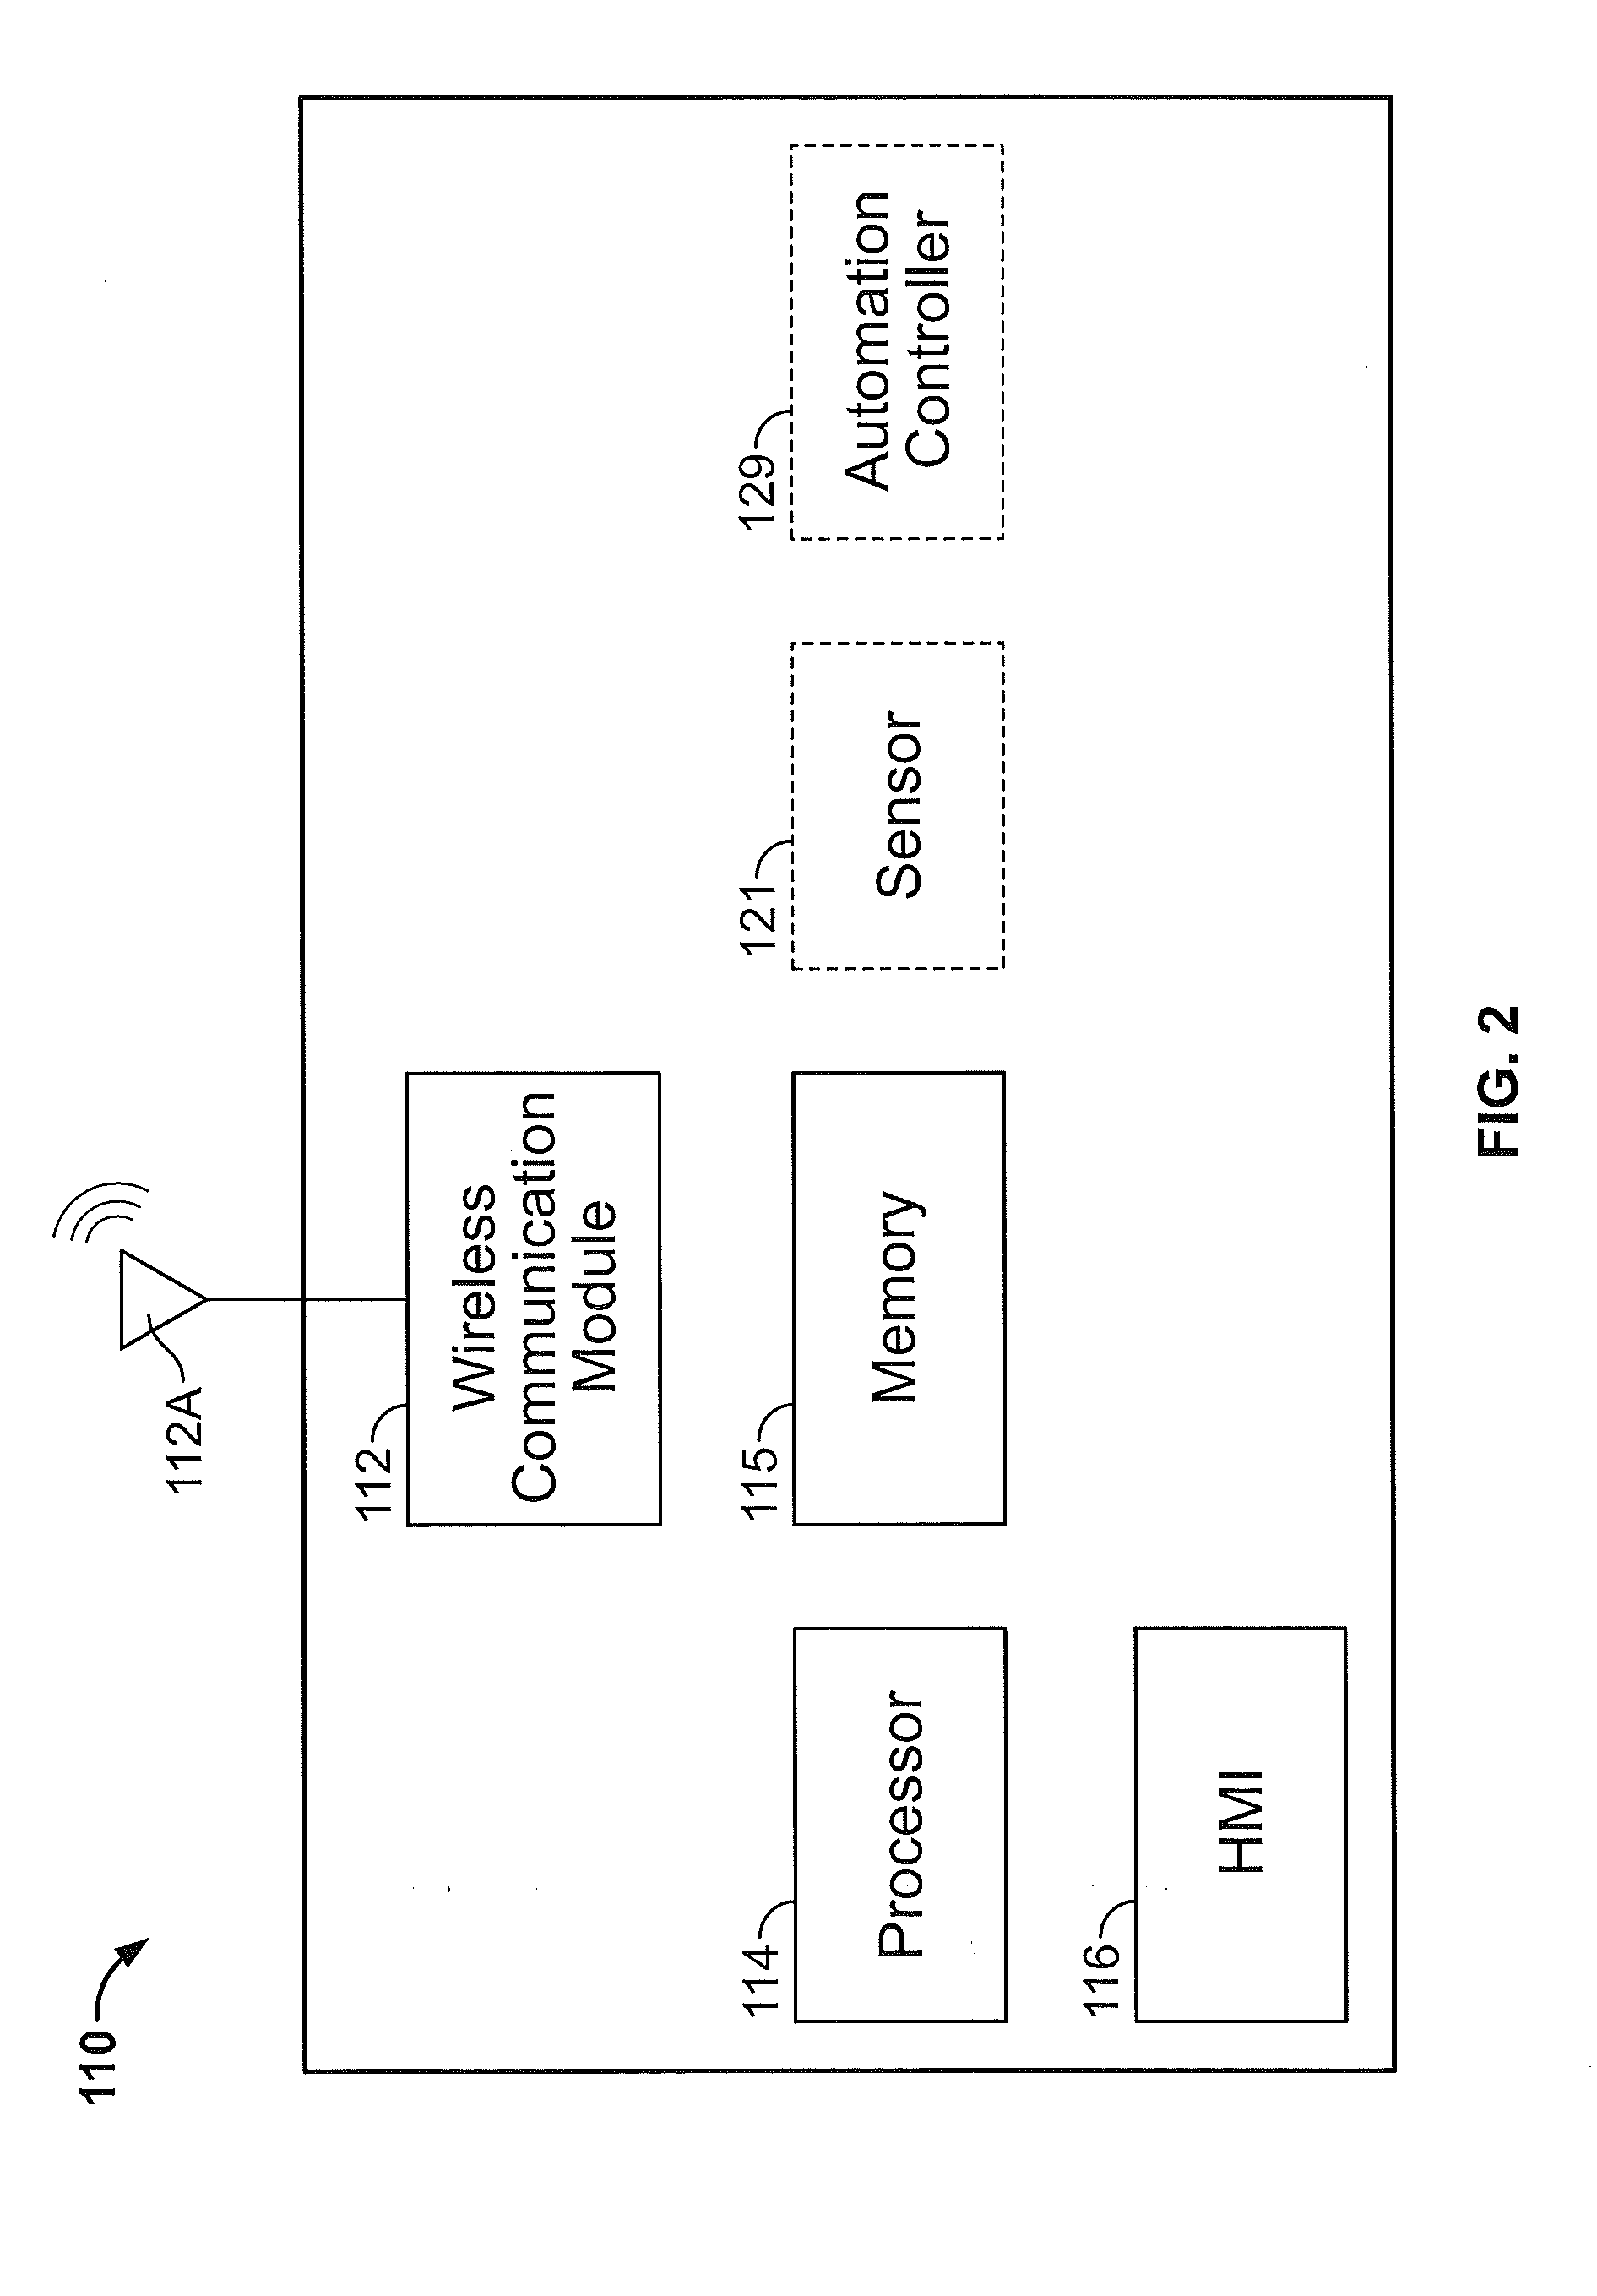 Environmental Management Systems Including Mobile Robots and Methods Using Same